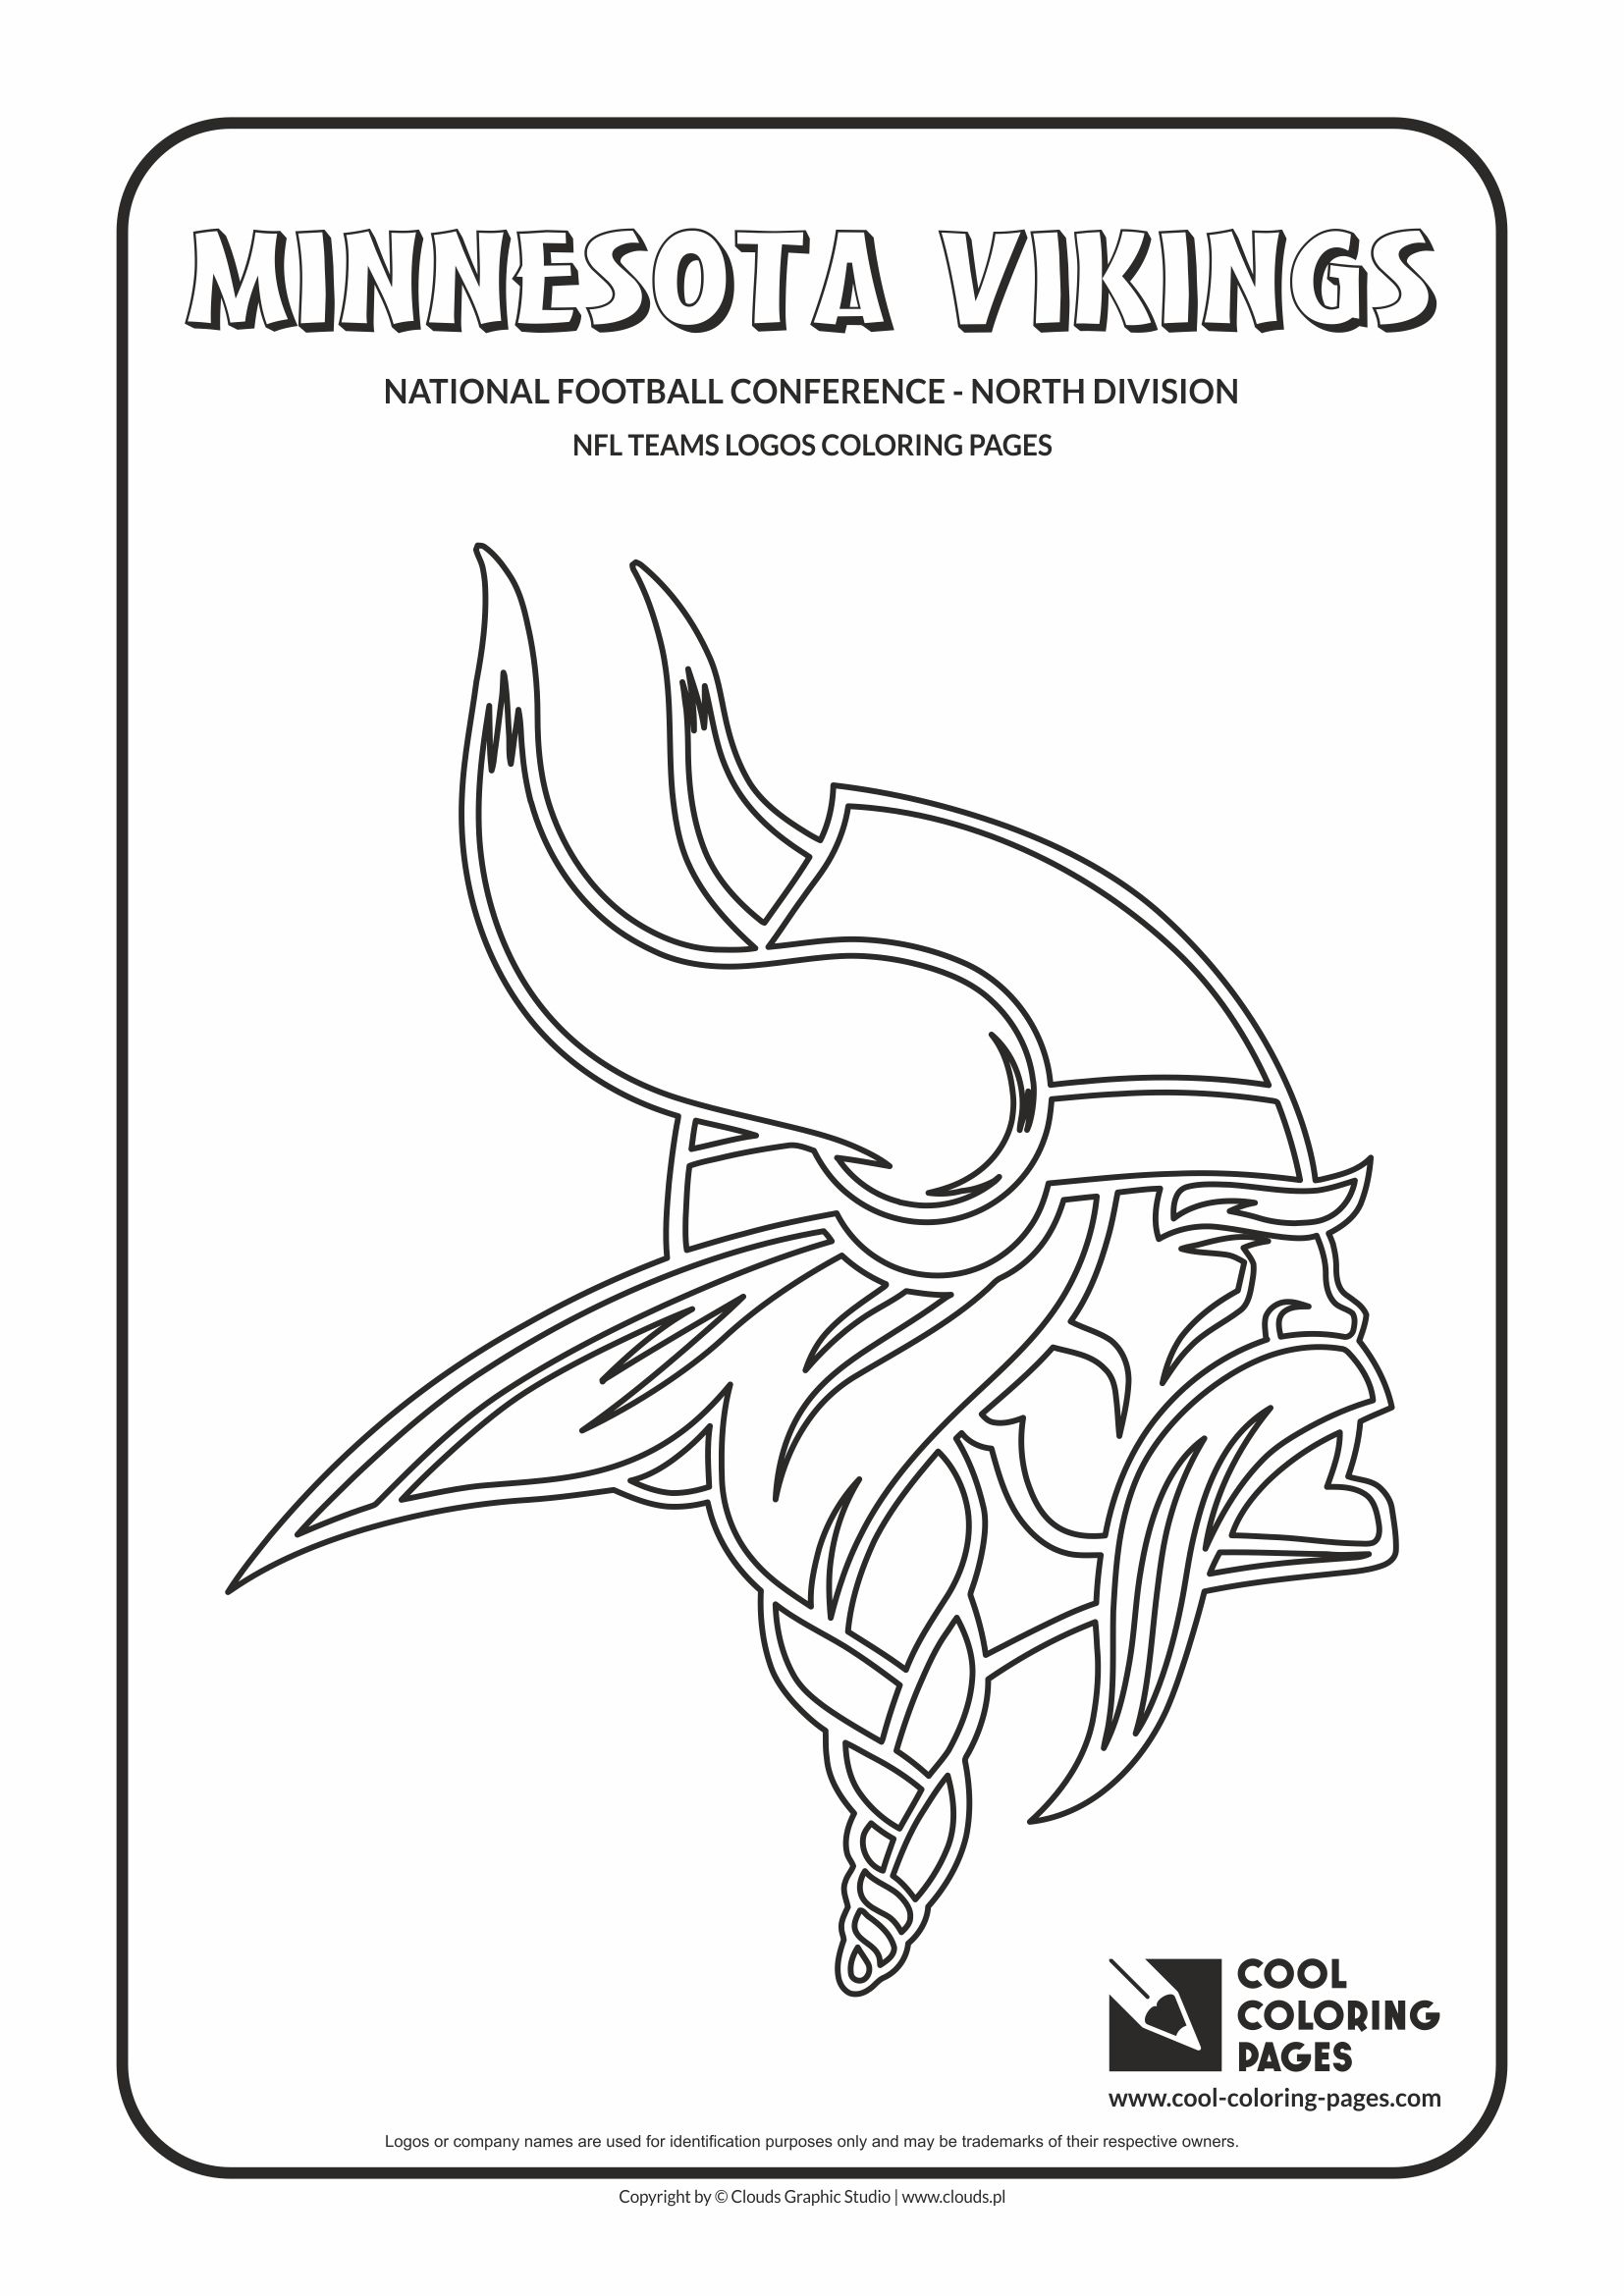 Cool coloring pages nfl teams logos coloring pages